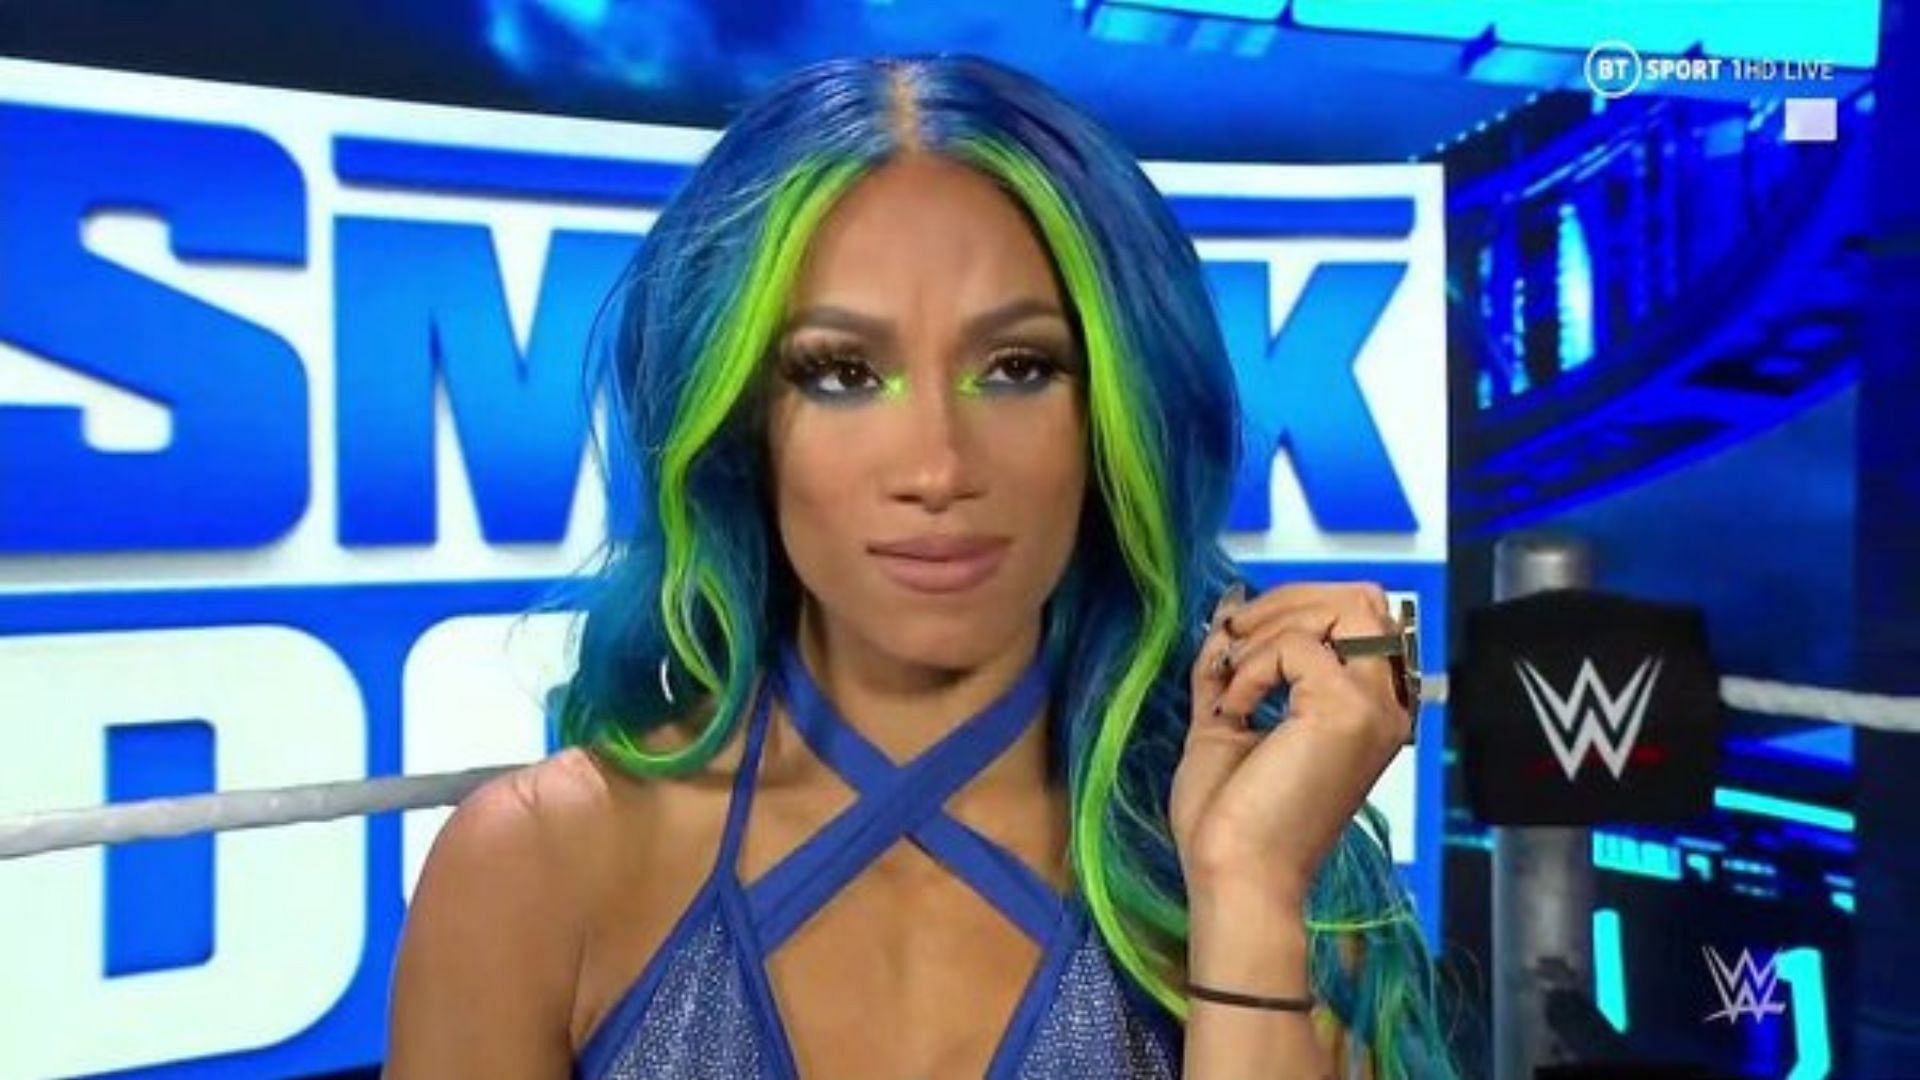 Could Sasha Banks finally be on her way to AEW?